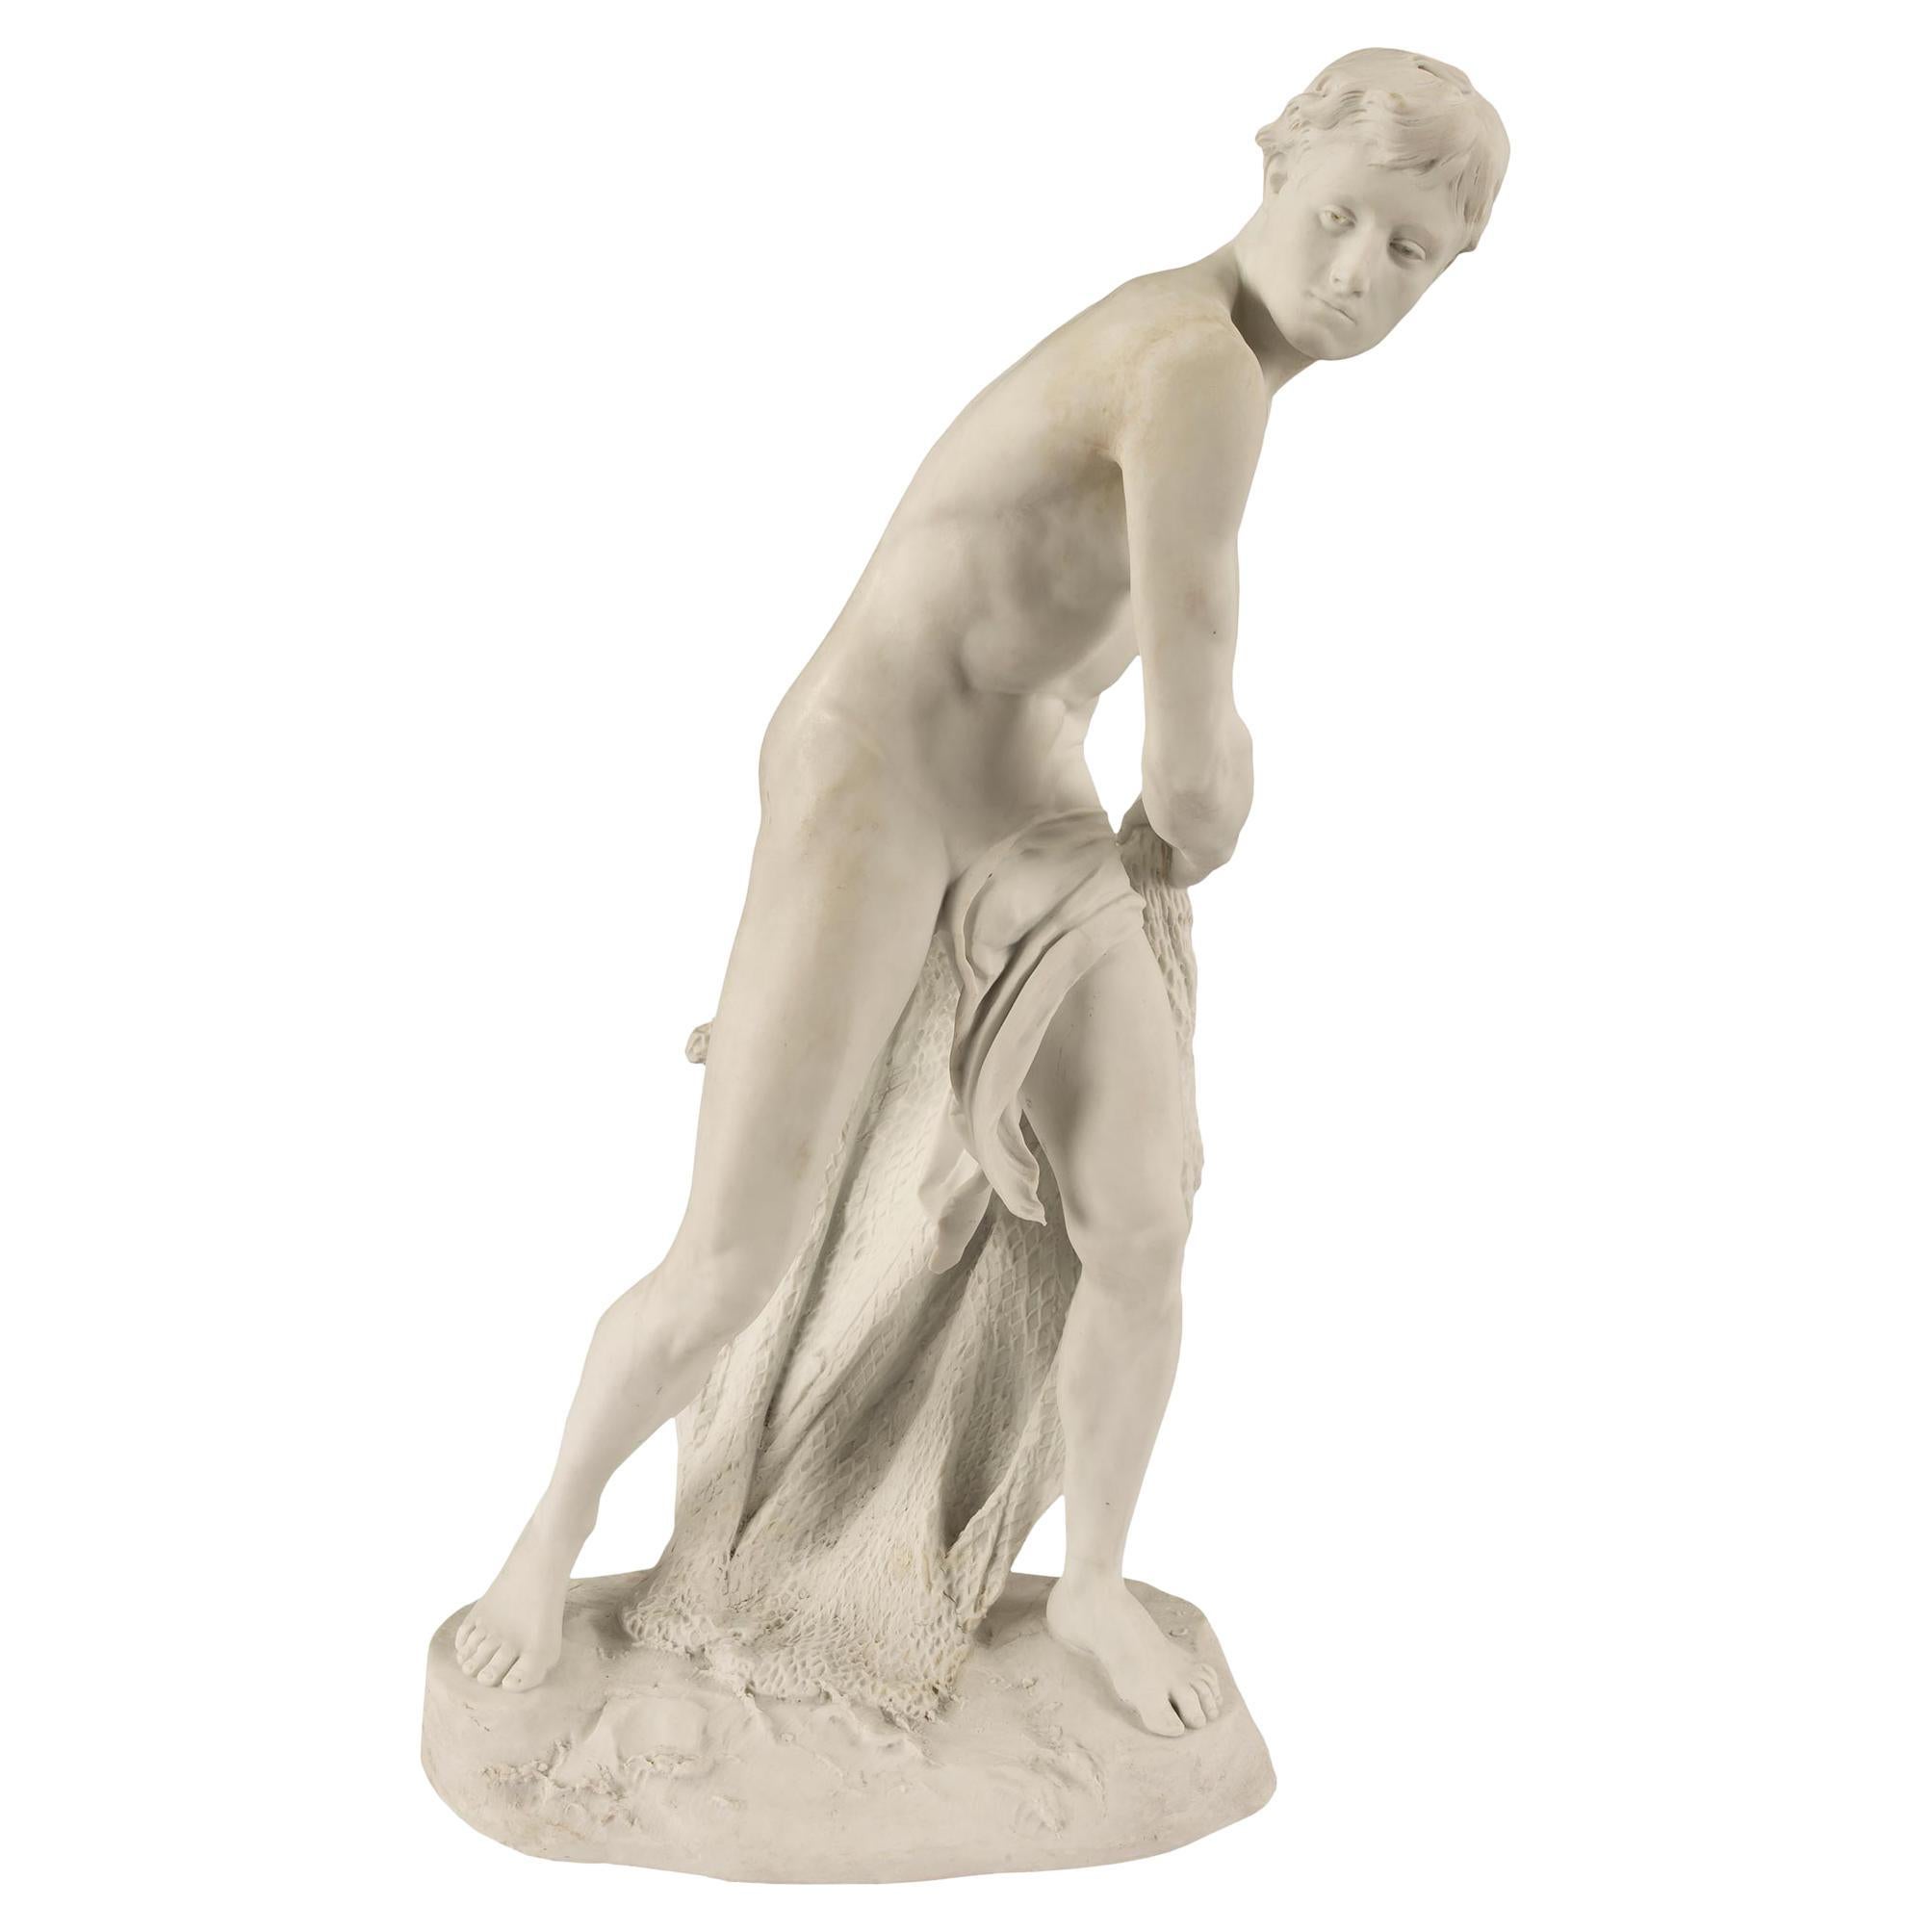 French Louis XVI Style Biscuit De Sèvres Porcelain Statue of a Fisher